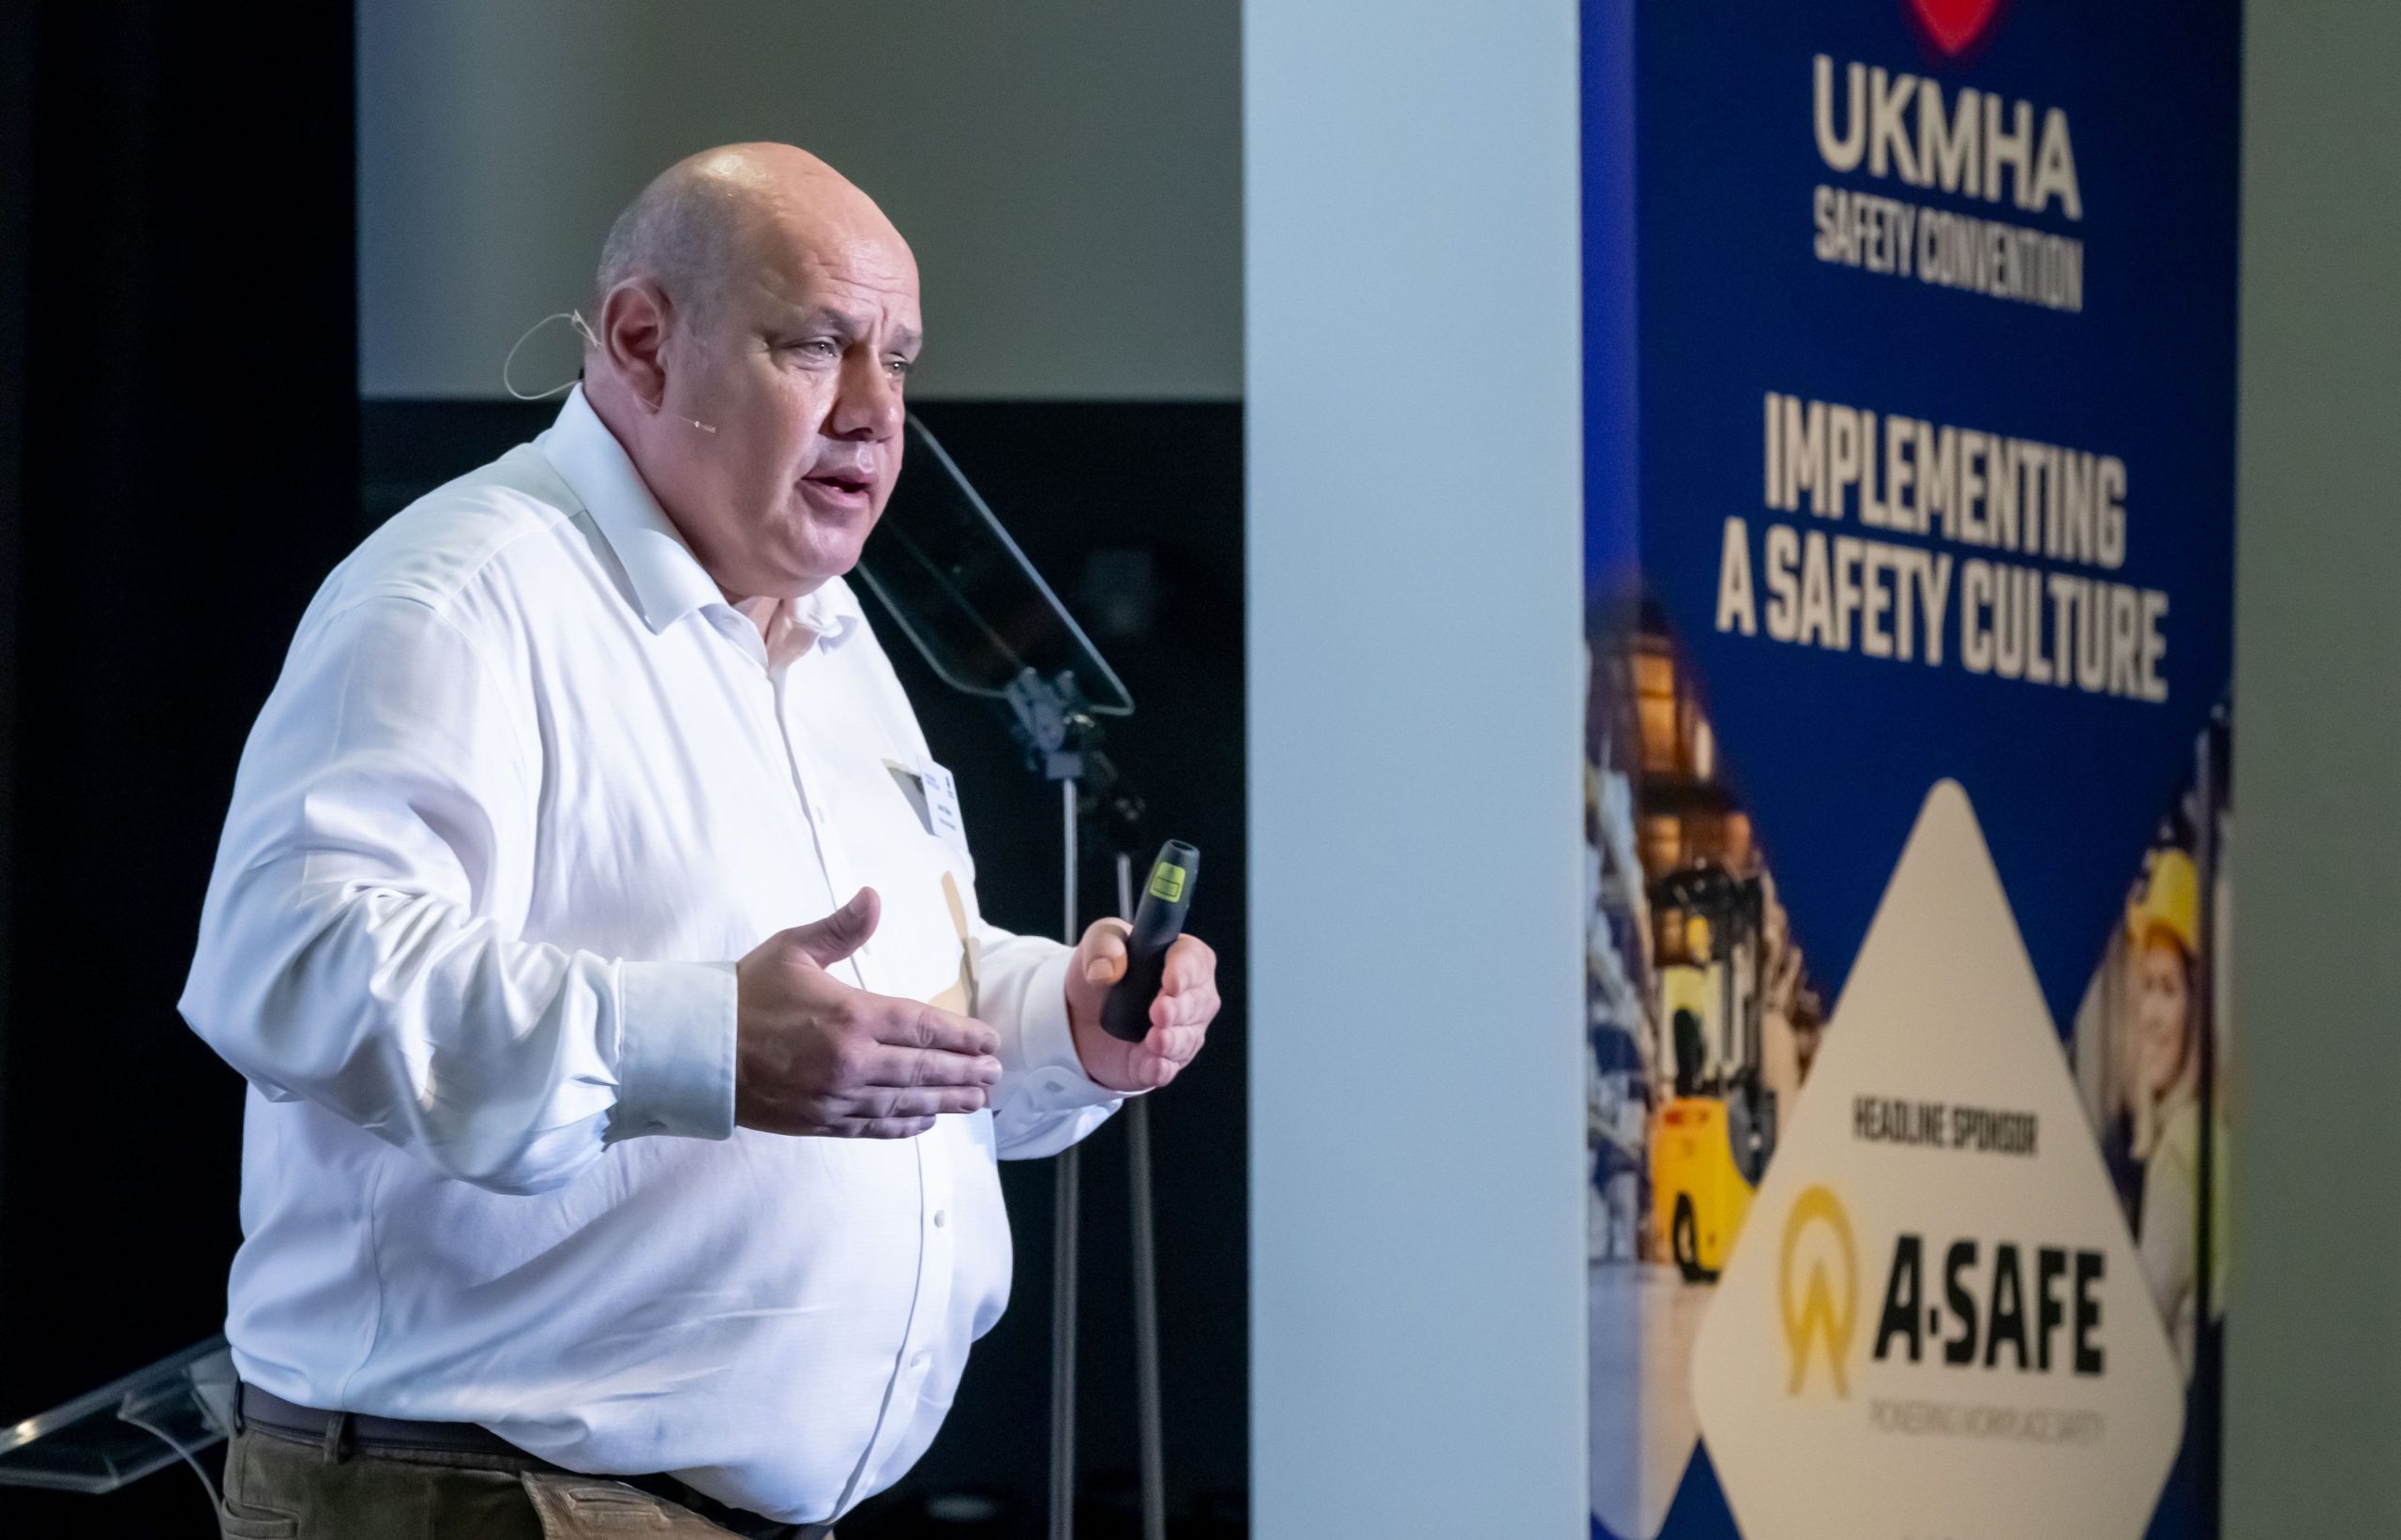 Empowering a workforce key to implementing a functioning safety culture, the UKMHA’s National Safety Convention is told